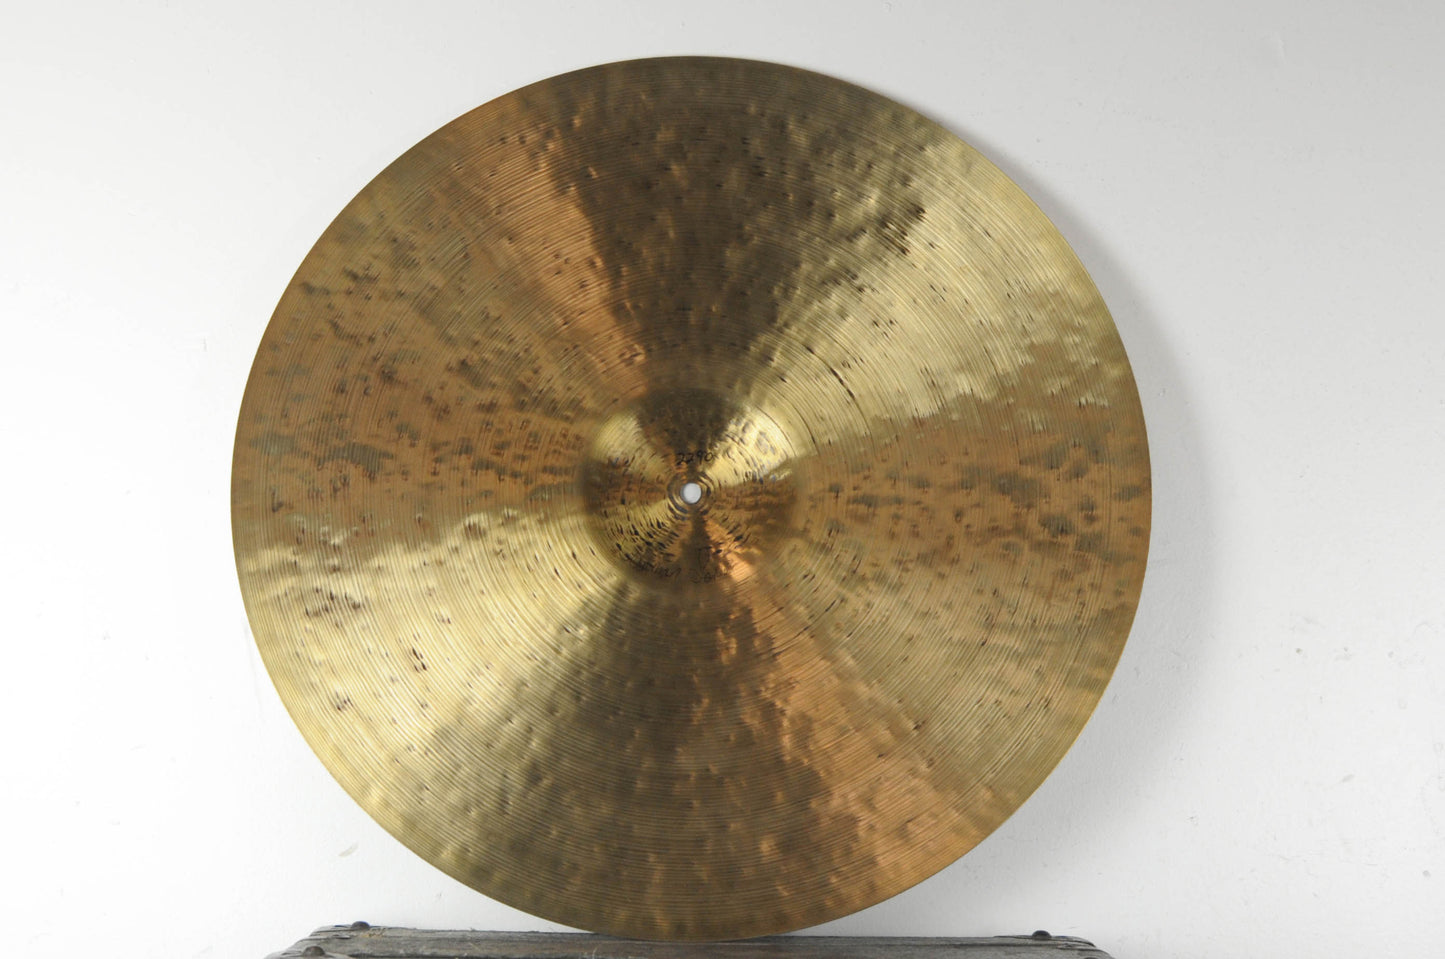 Istanbul Agop 22" 30th Anniversary Ride Cymbal 2290g